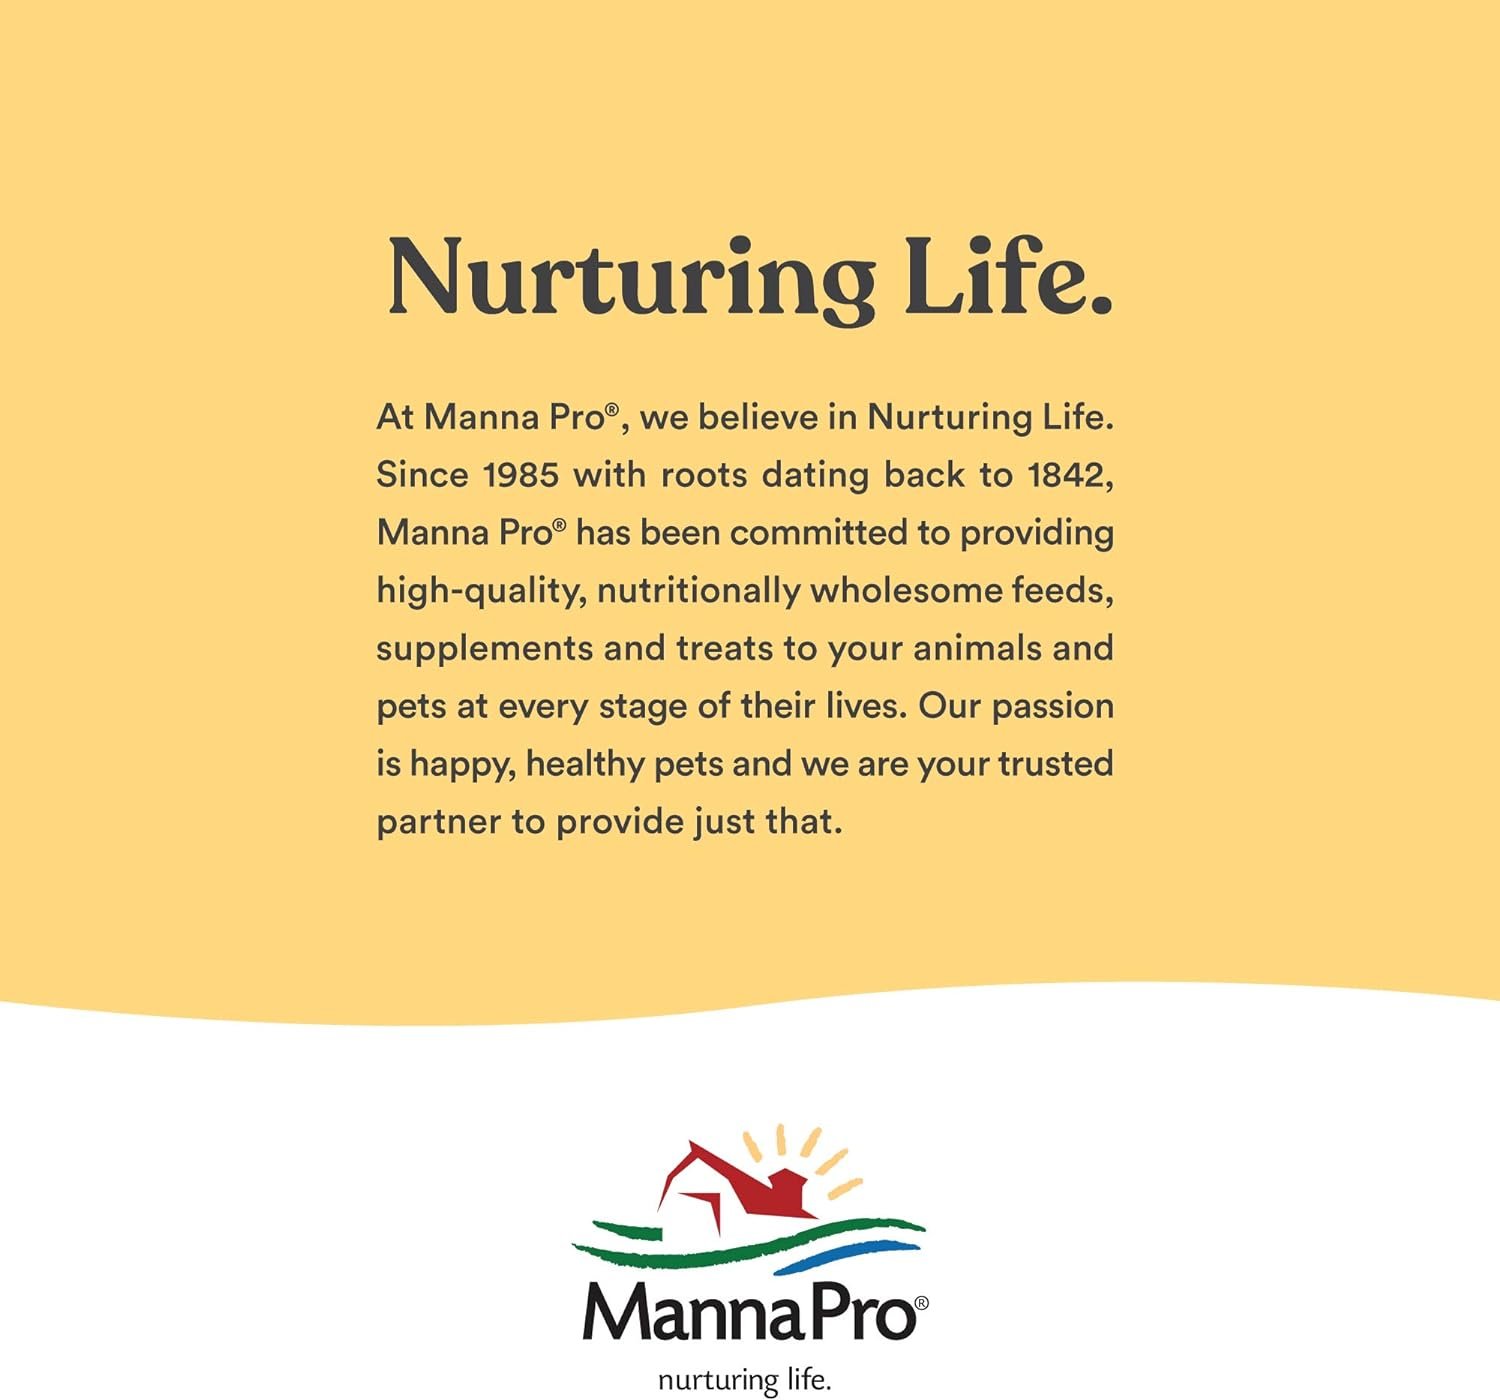 Manna Pro Chicken Feed | 16% Chicken Food with Probiotic Crumbles, Chicken Layer Feed | 8 Pounds